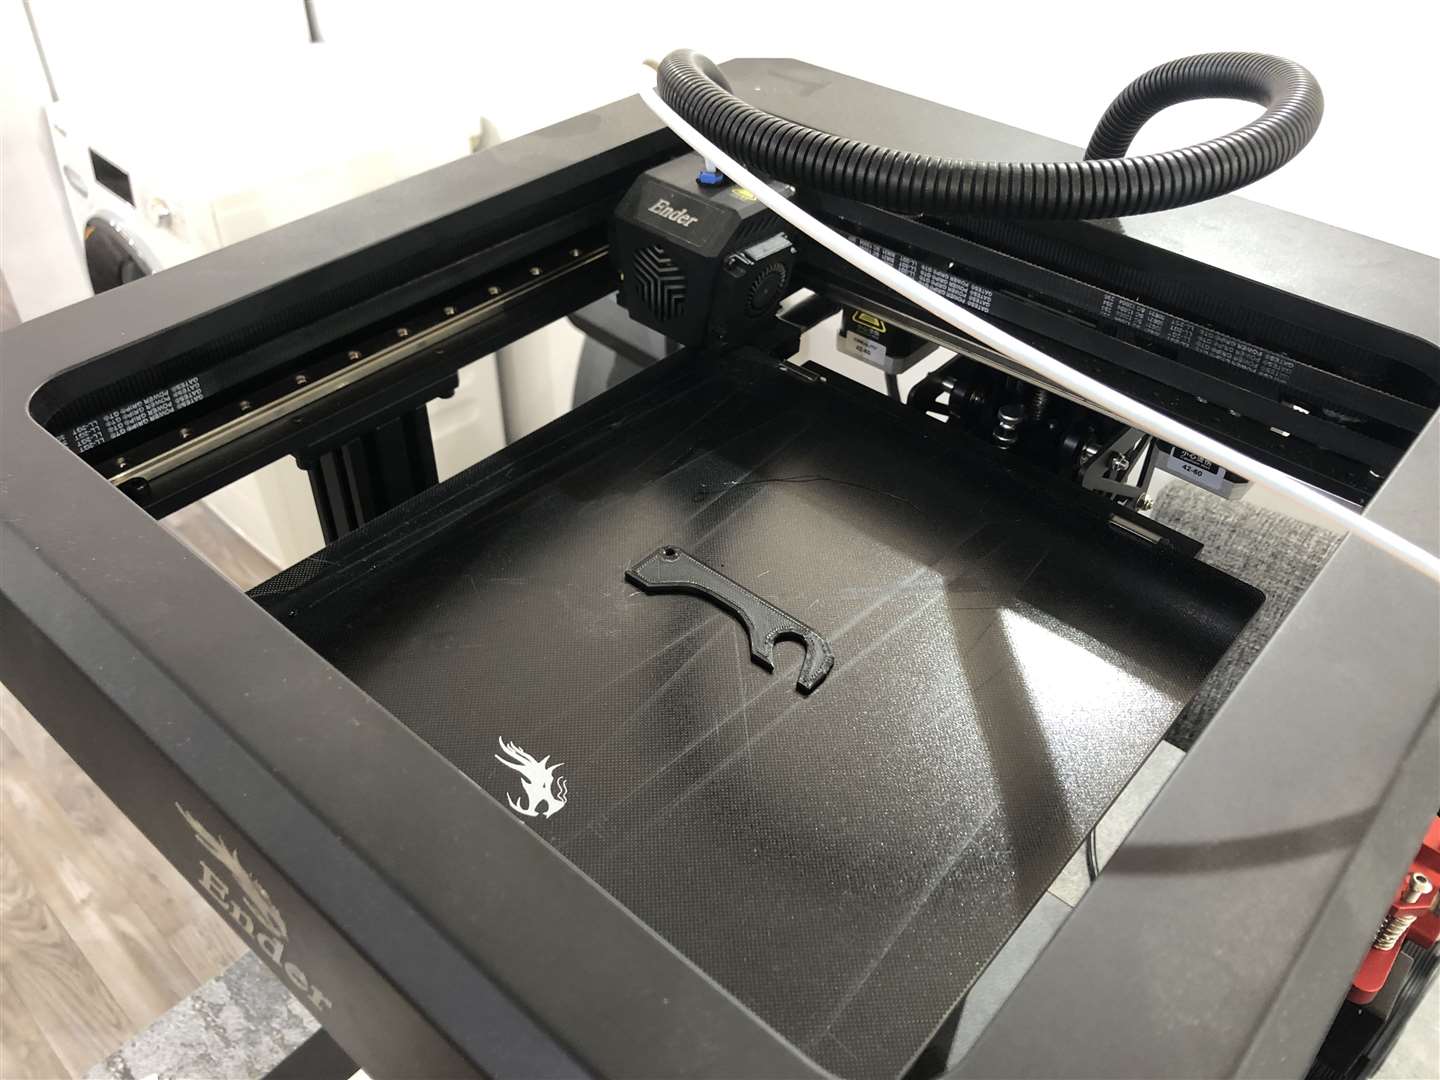 The Ender 3D printer was also seen at the show